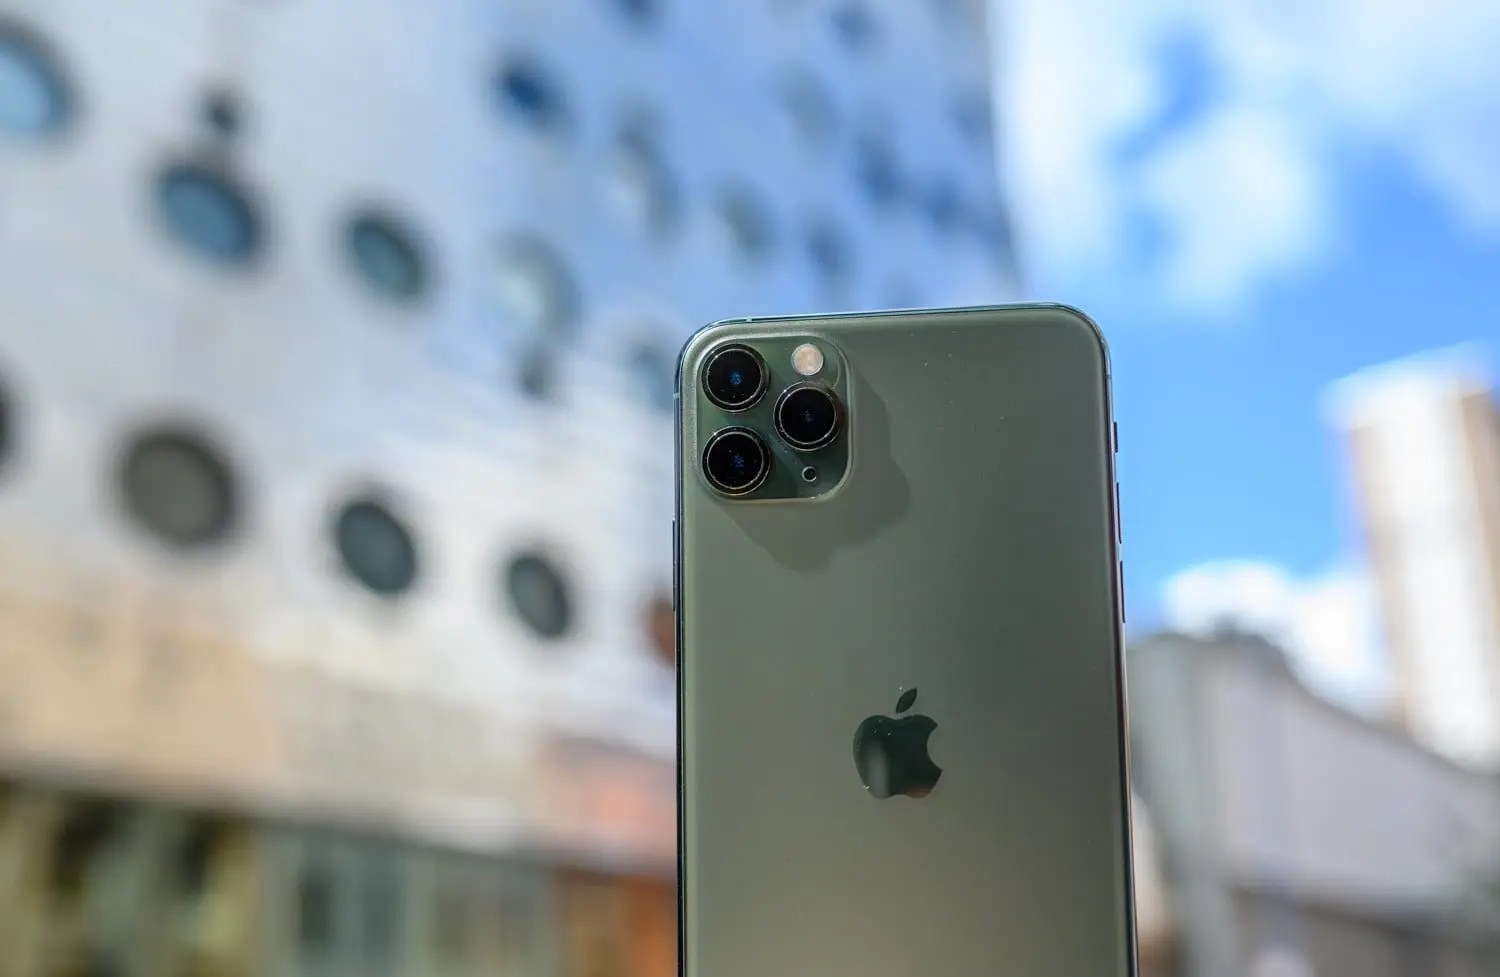 How To Fix Camera Issues On iPhone 11 Pro Max